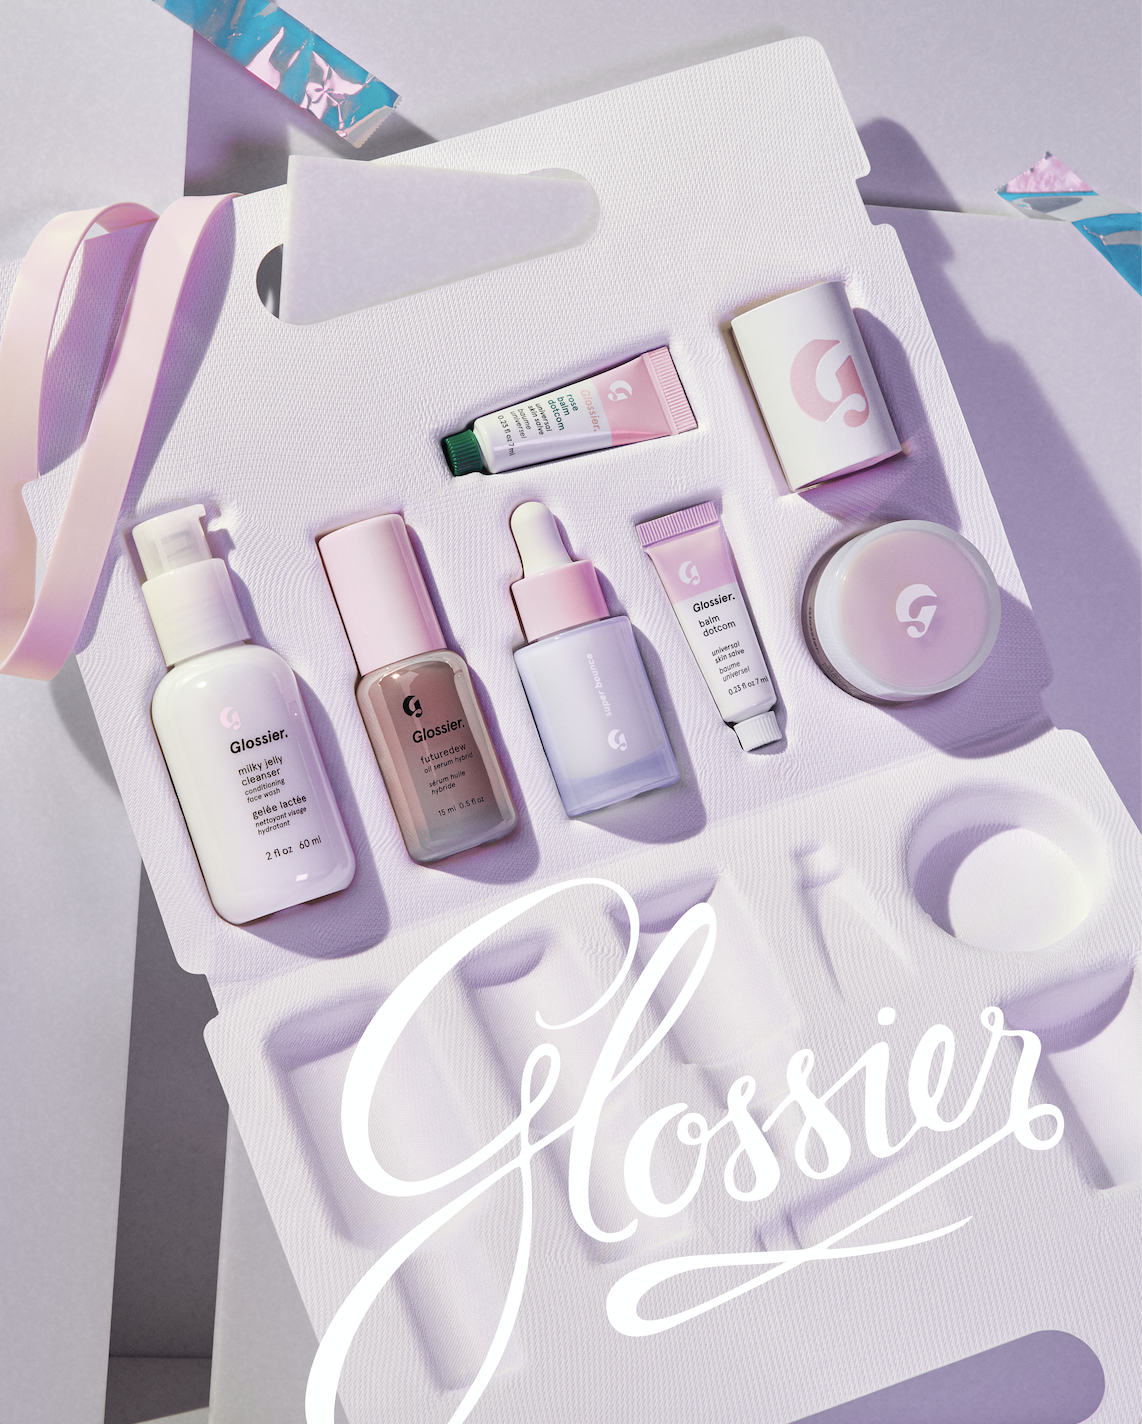 The Skincare Edit set in a recyclable molded paper case filled with mini Glossier skincare bestsellers